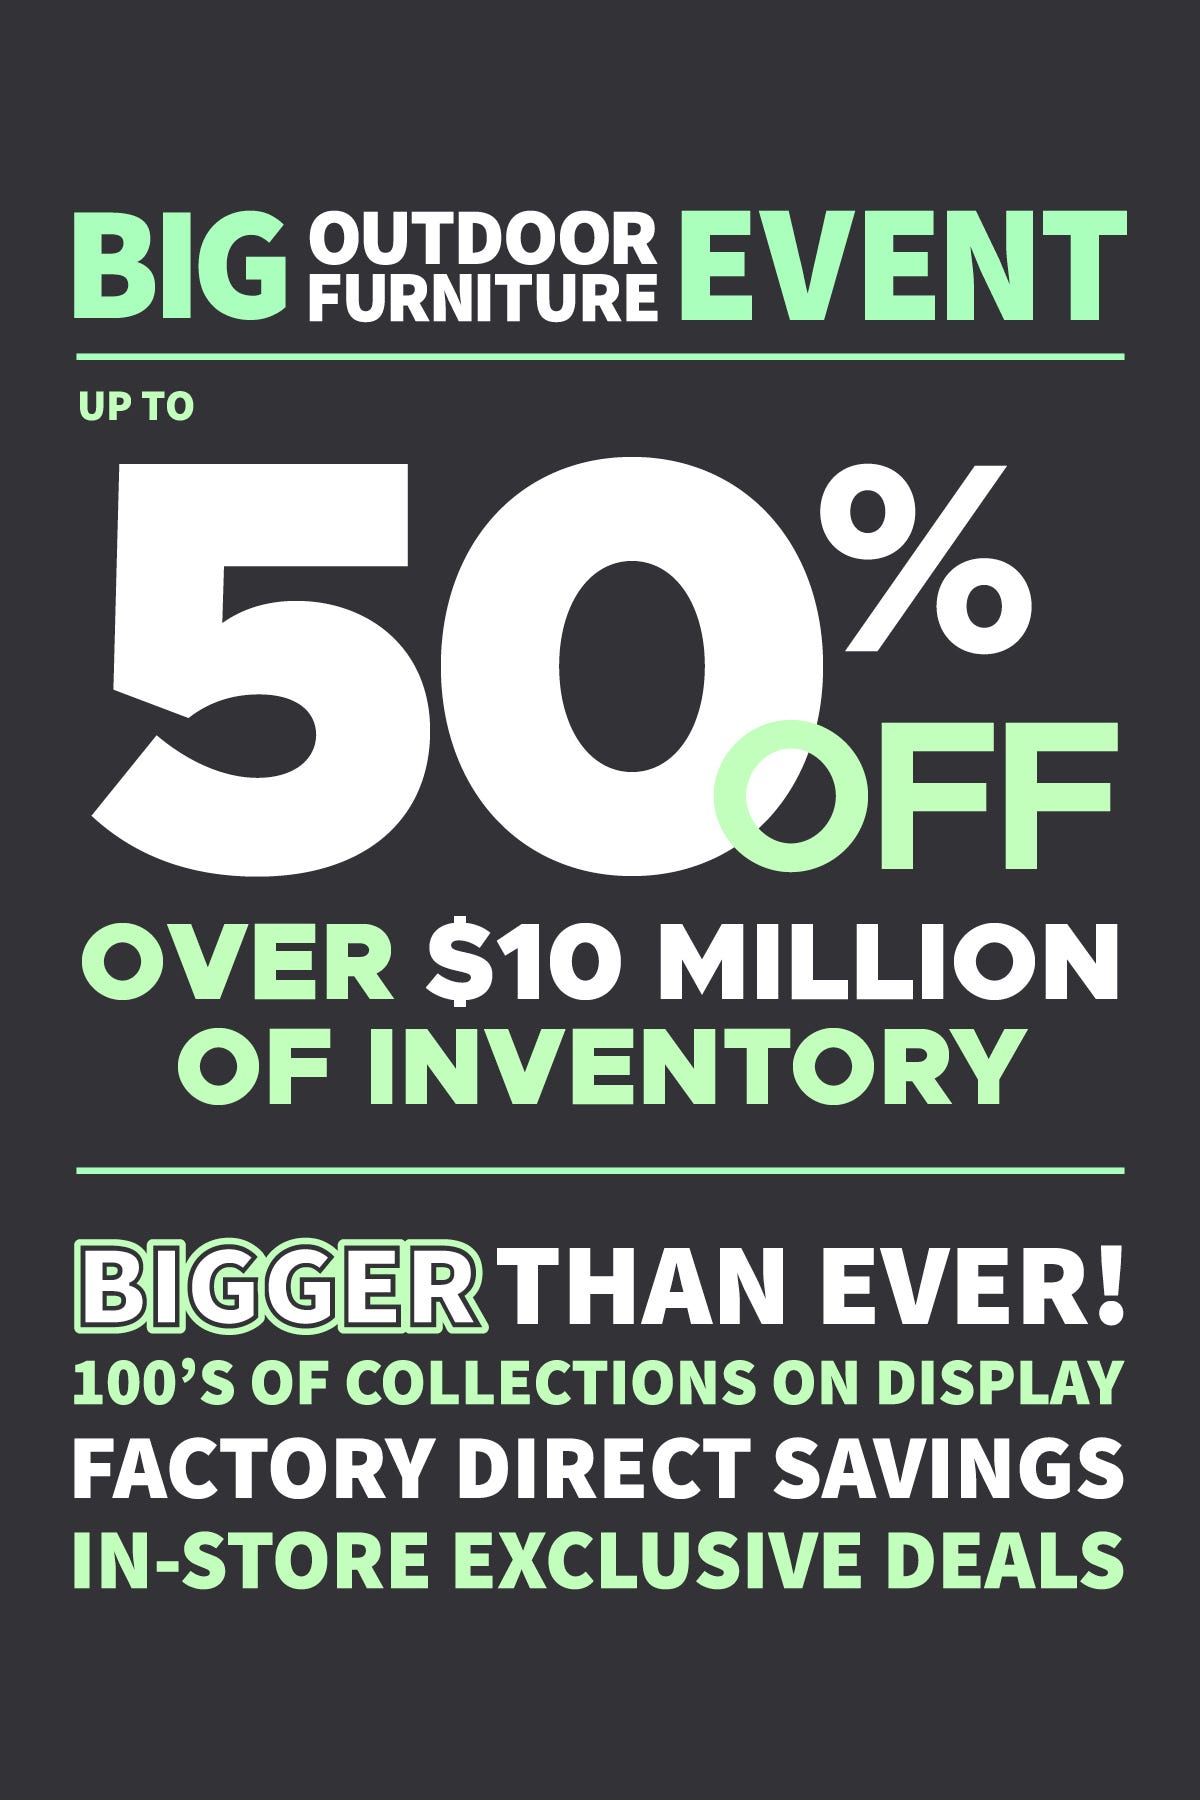 Big Outdoor Furniture Event. Up to 50% off Over $10 Million Dollars of Inventory. BIGGER than ever! 100's of collections on display. Factory Direct Savings. In-Store Exclusive Deals.